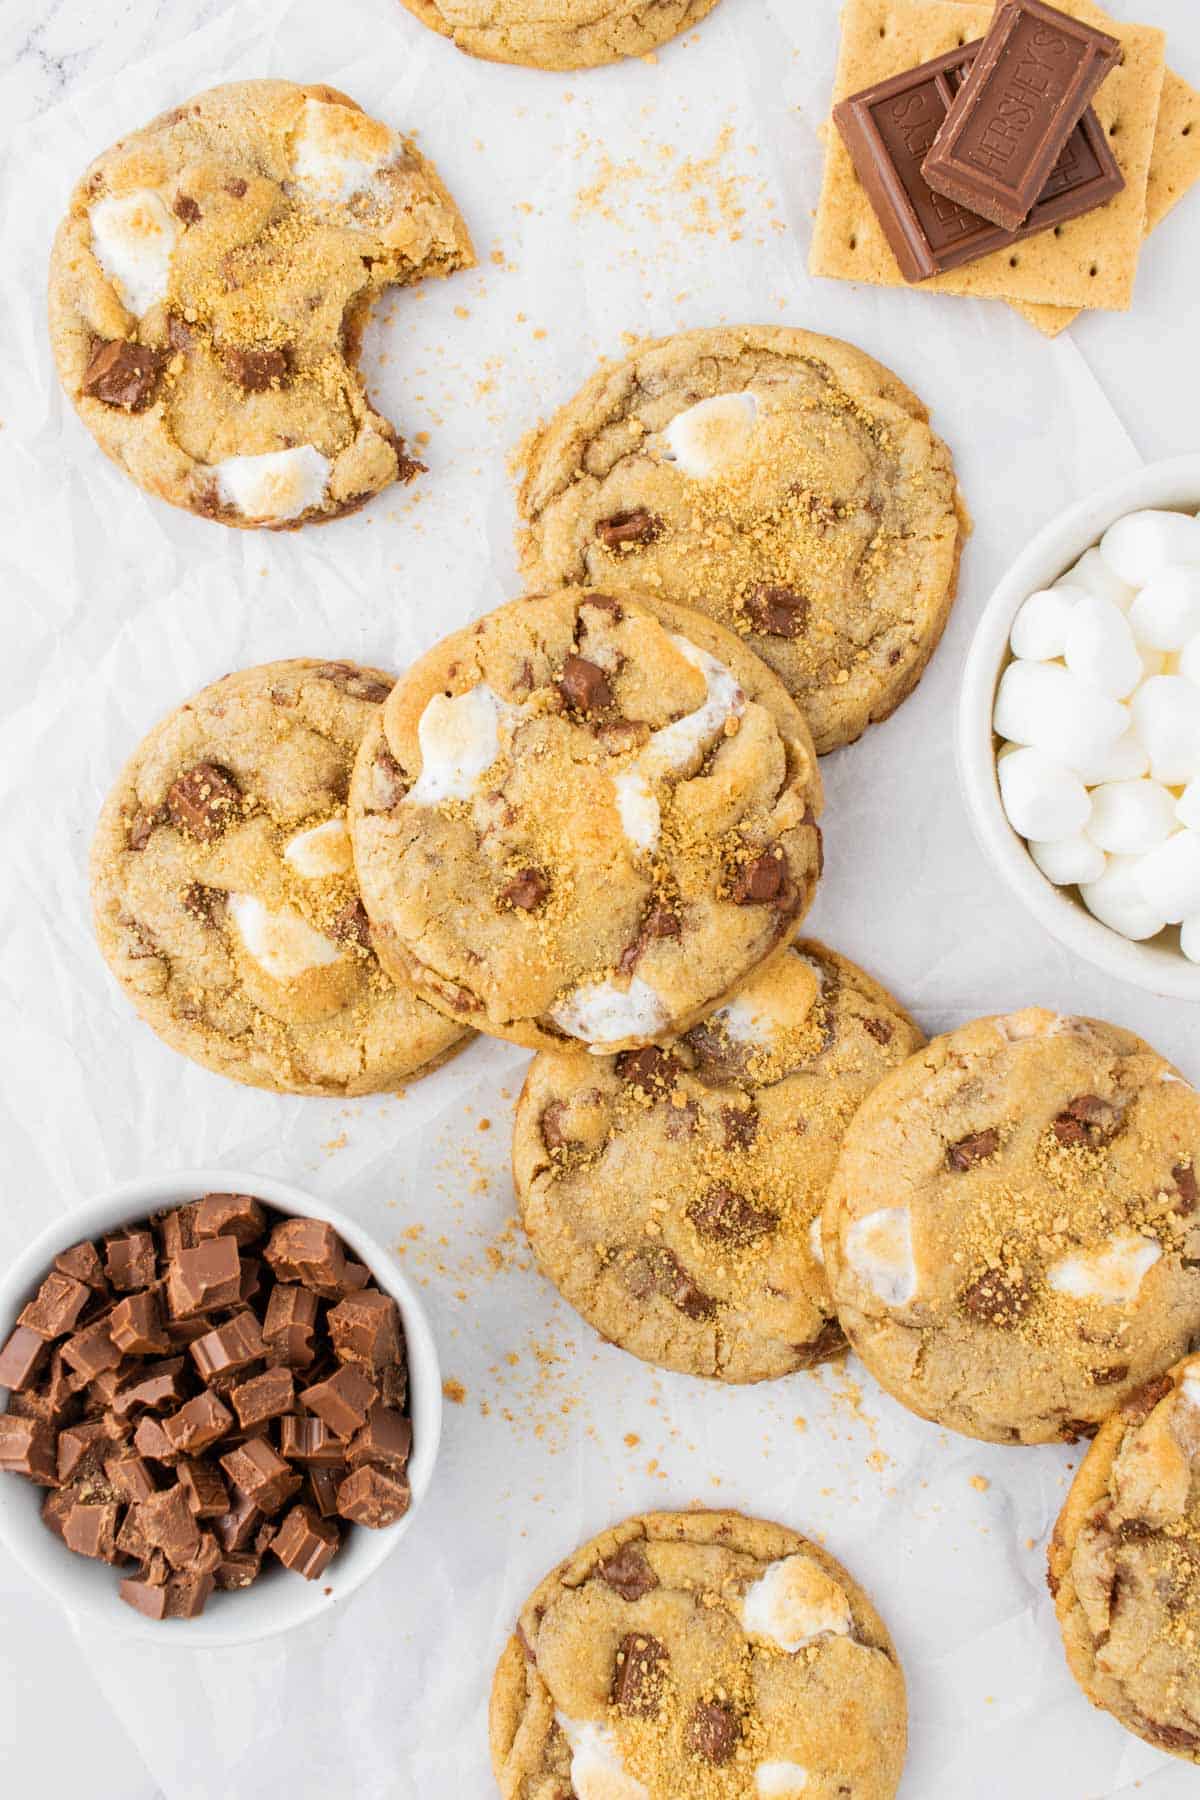 a pile of smores cookies with graham crackers, chocolate, marshmallows, and a partially eaten cookie arranged around them